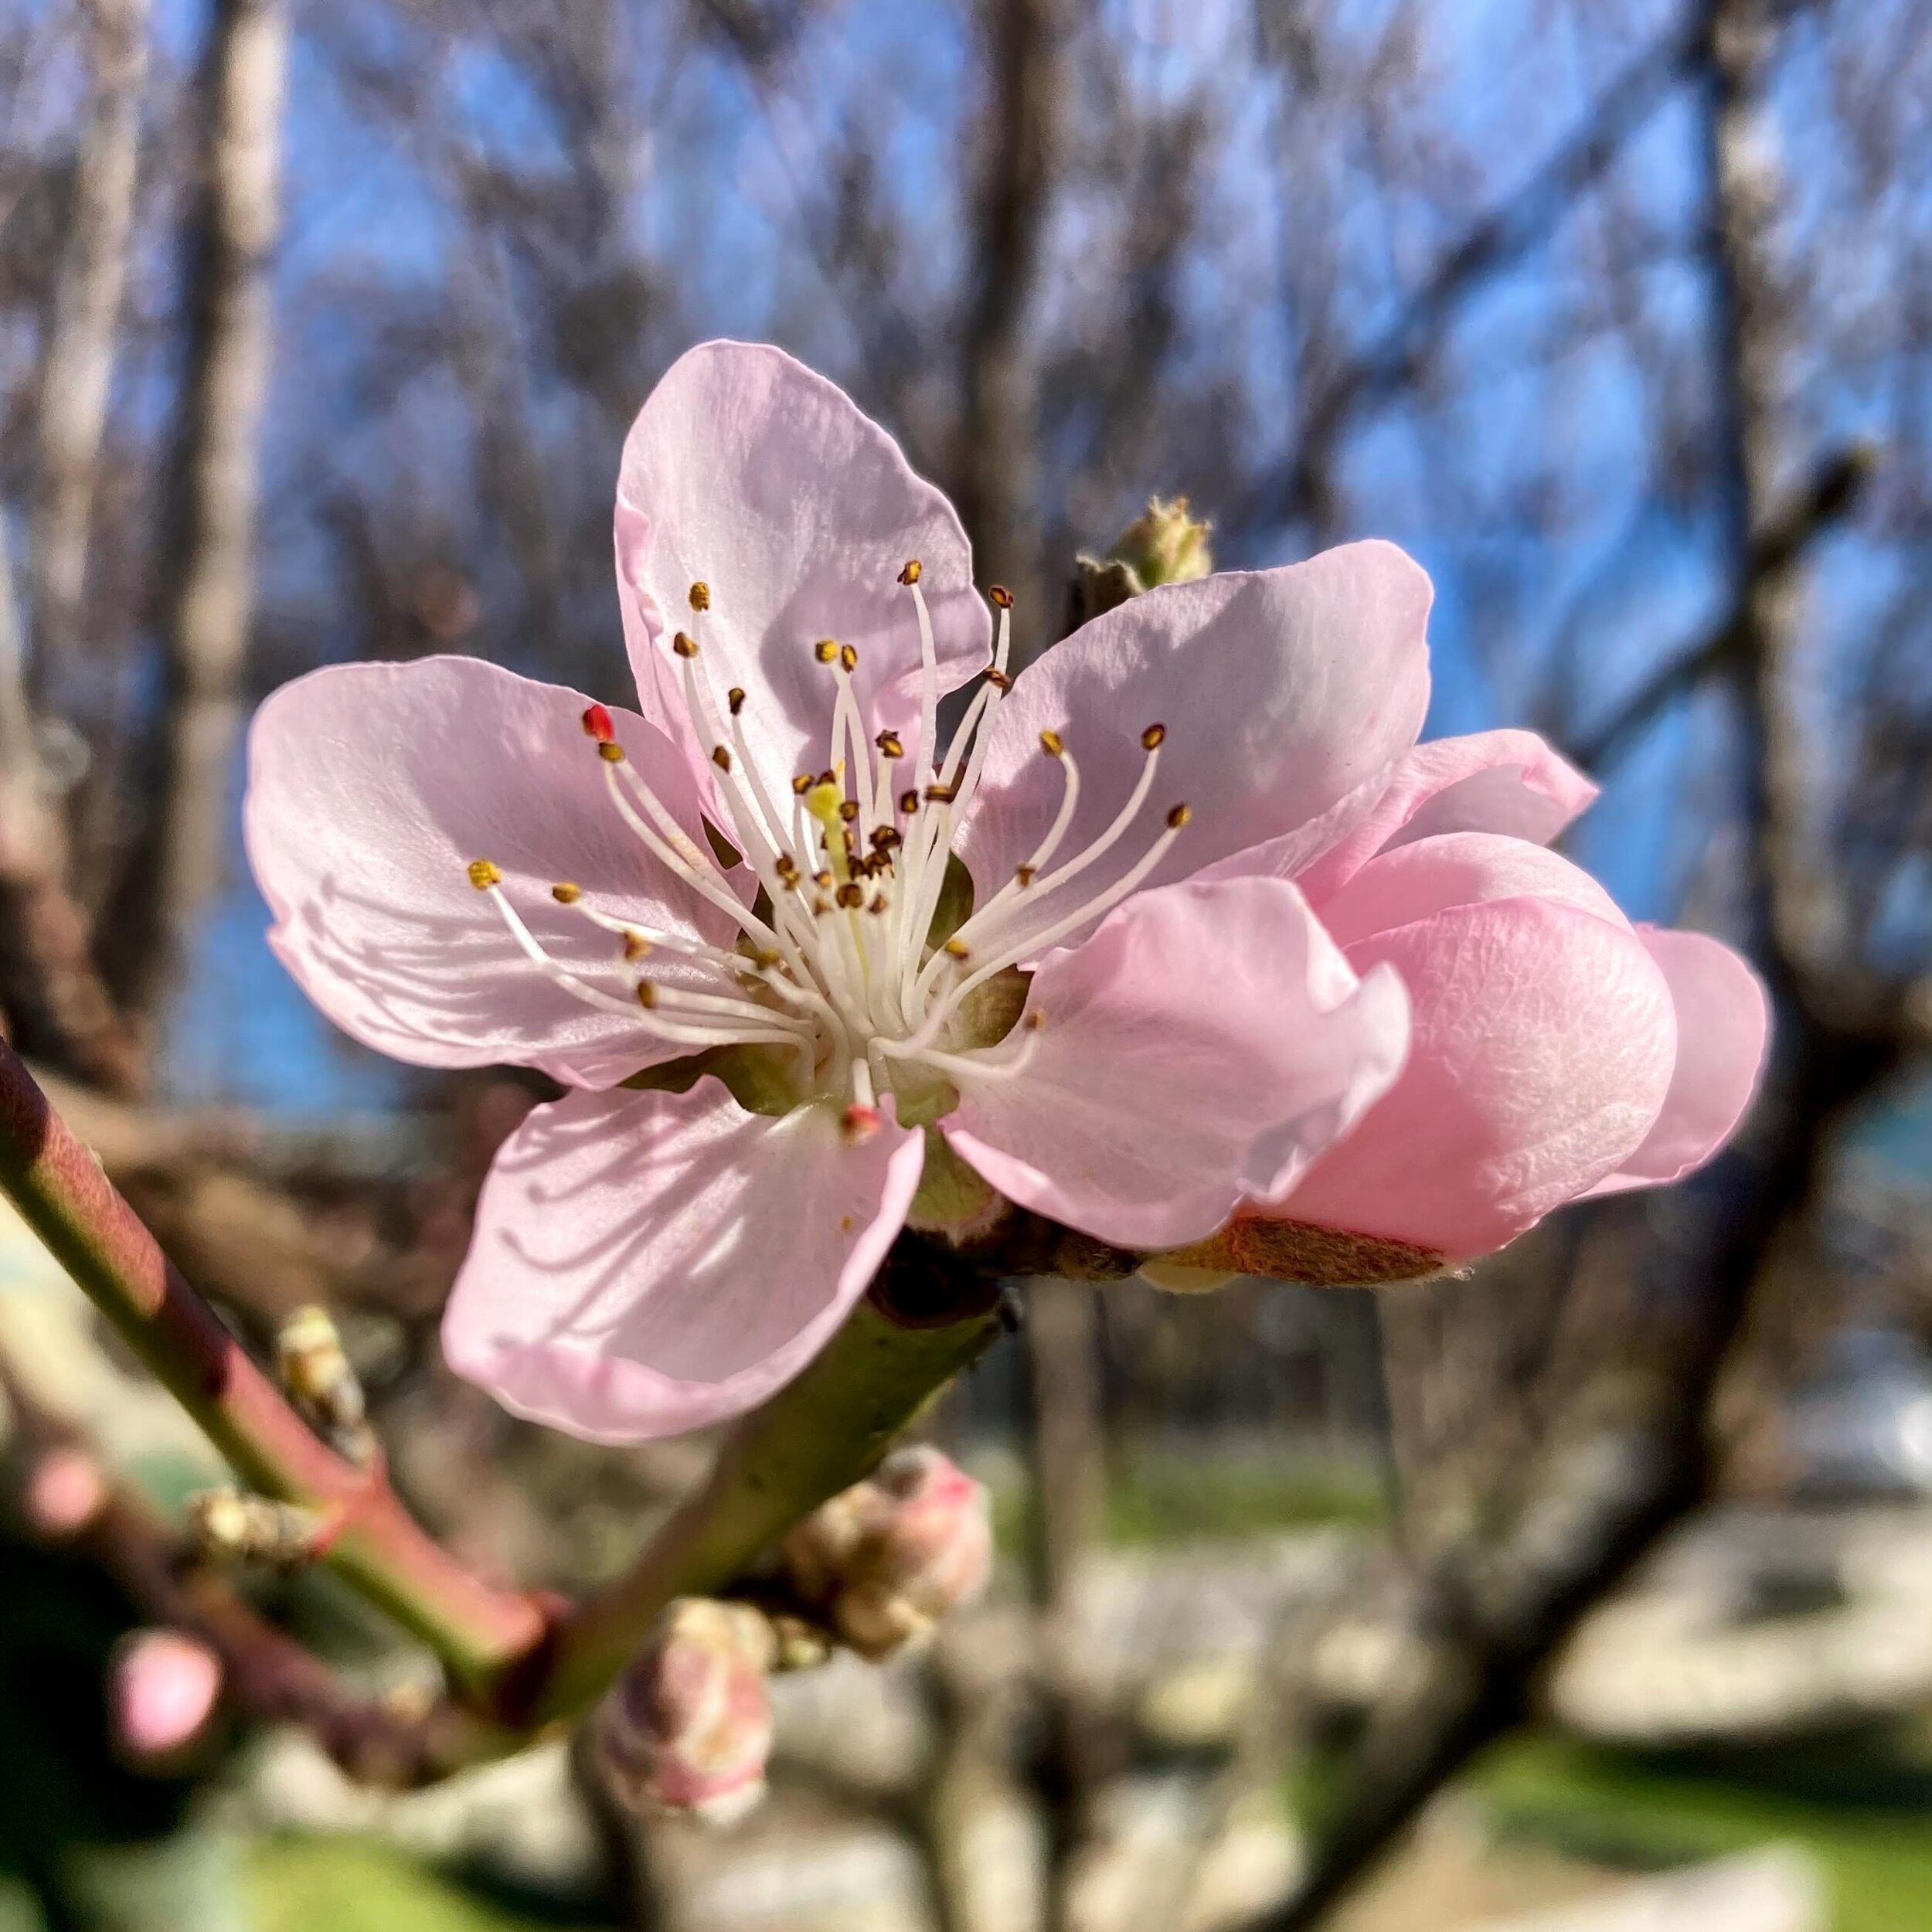 The nectarine tree is beginning to bloom - a sure sign that spring has sprung at the garden! 🌸 What are you growing in your spring garden this year?

#shelbyparkcommunitygarden #shelbyparklouisville #louisville #communitygarden #nectarine #spring #s